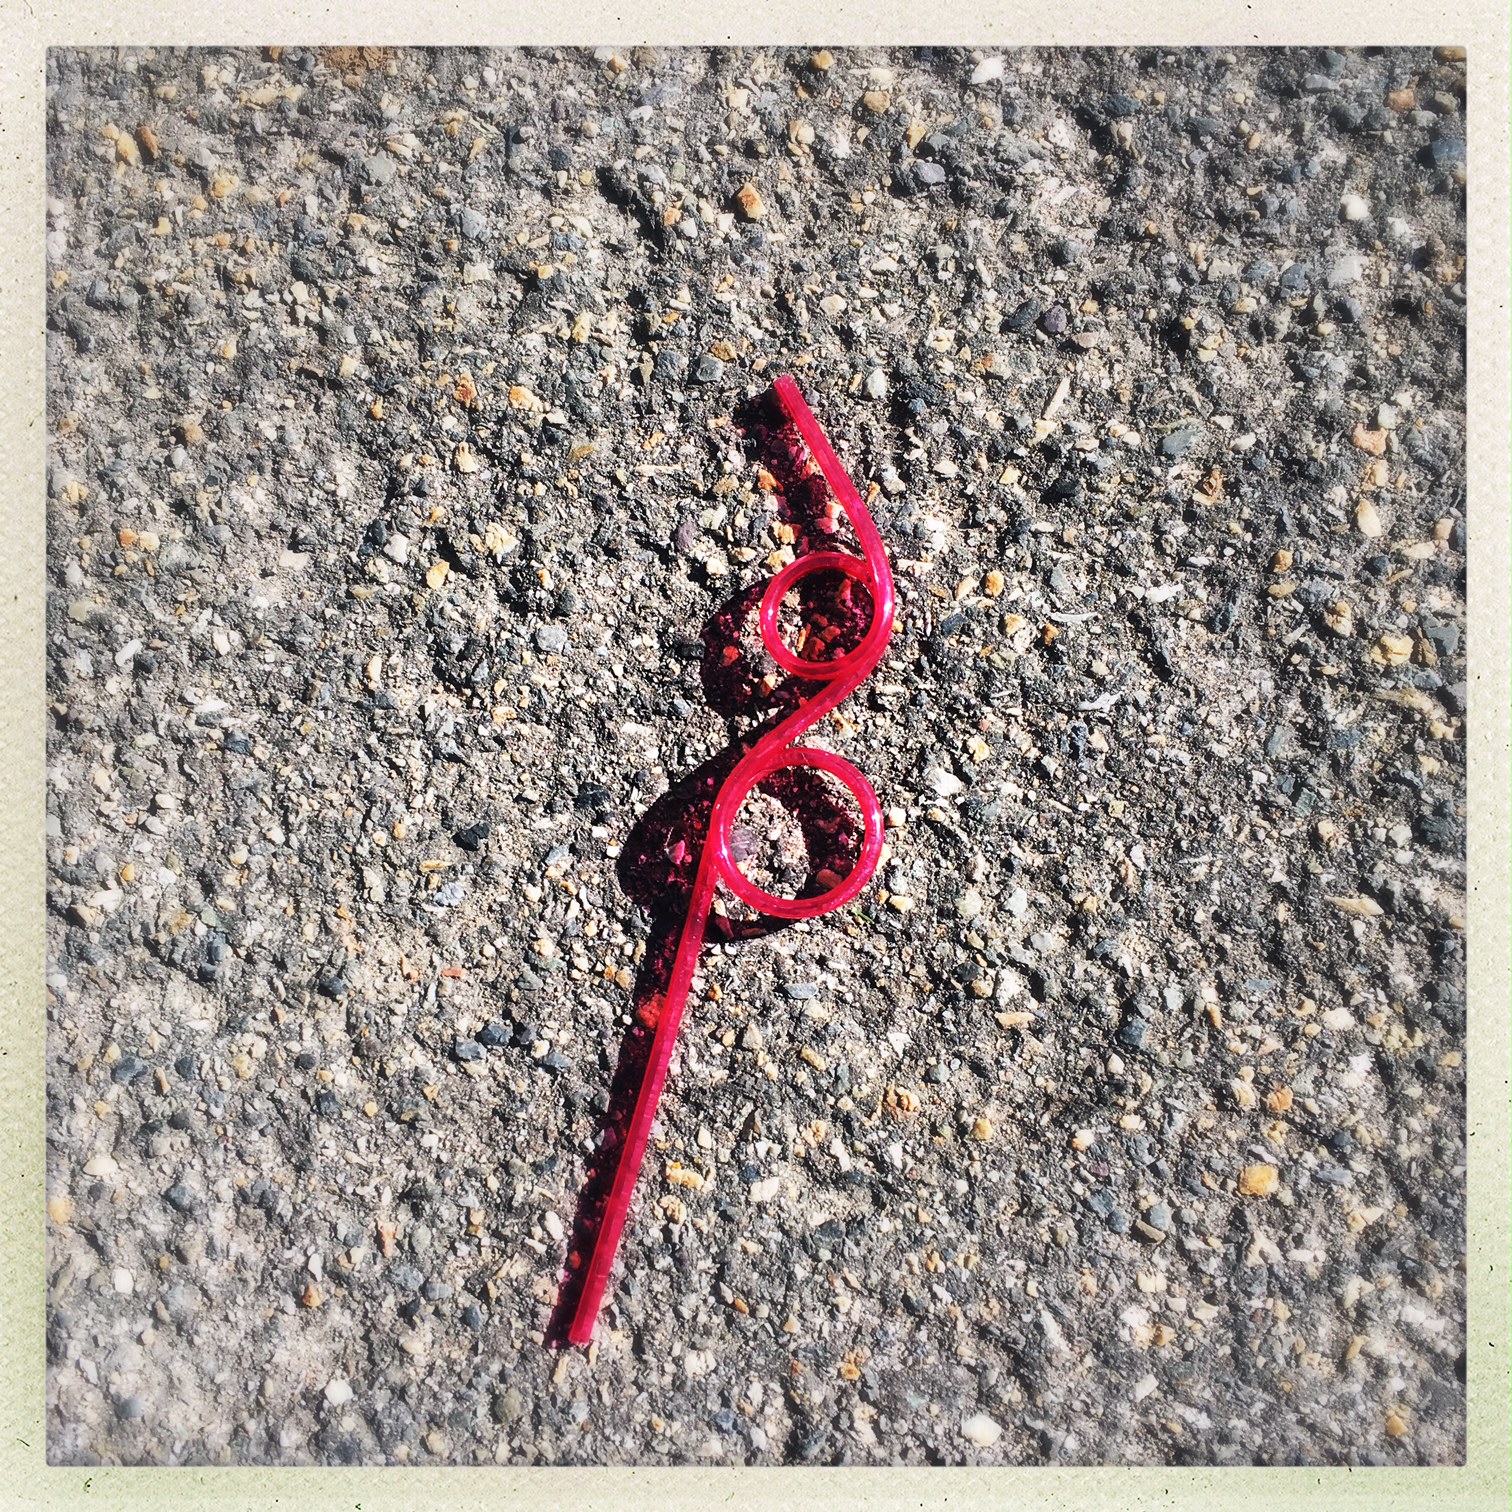  discarded (lost?) crazy straw. forlorn. 